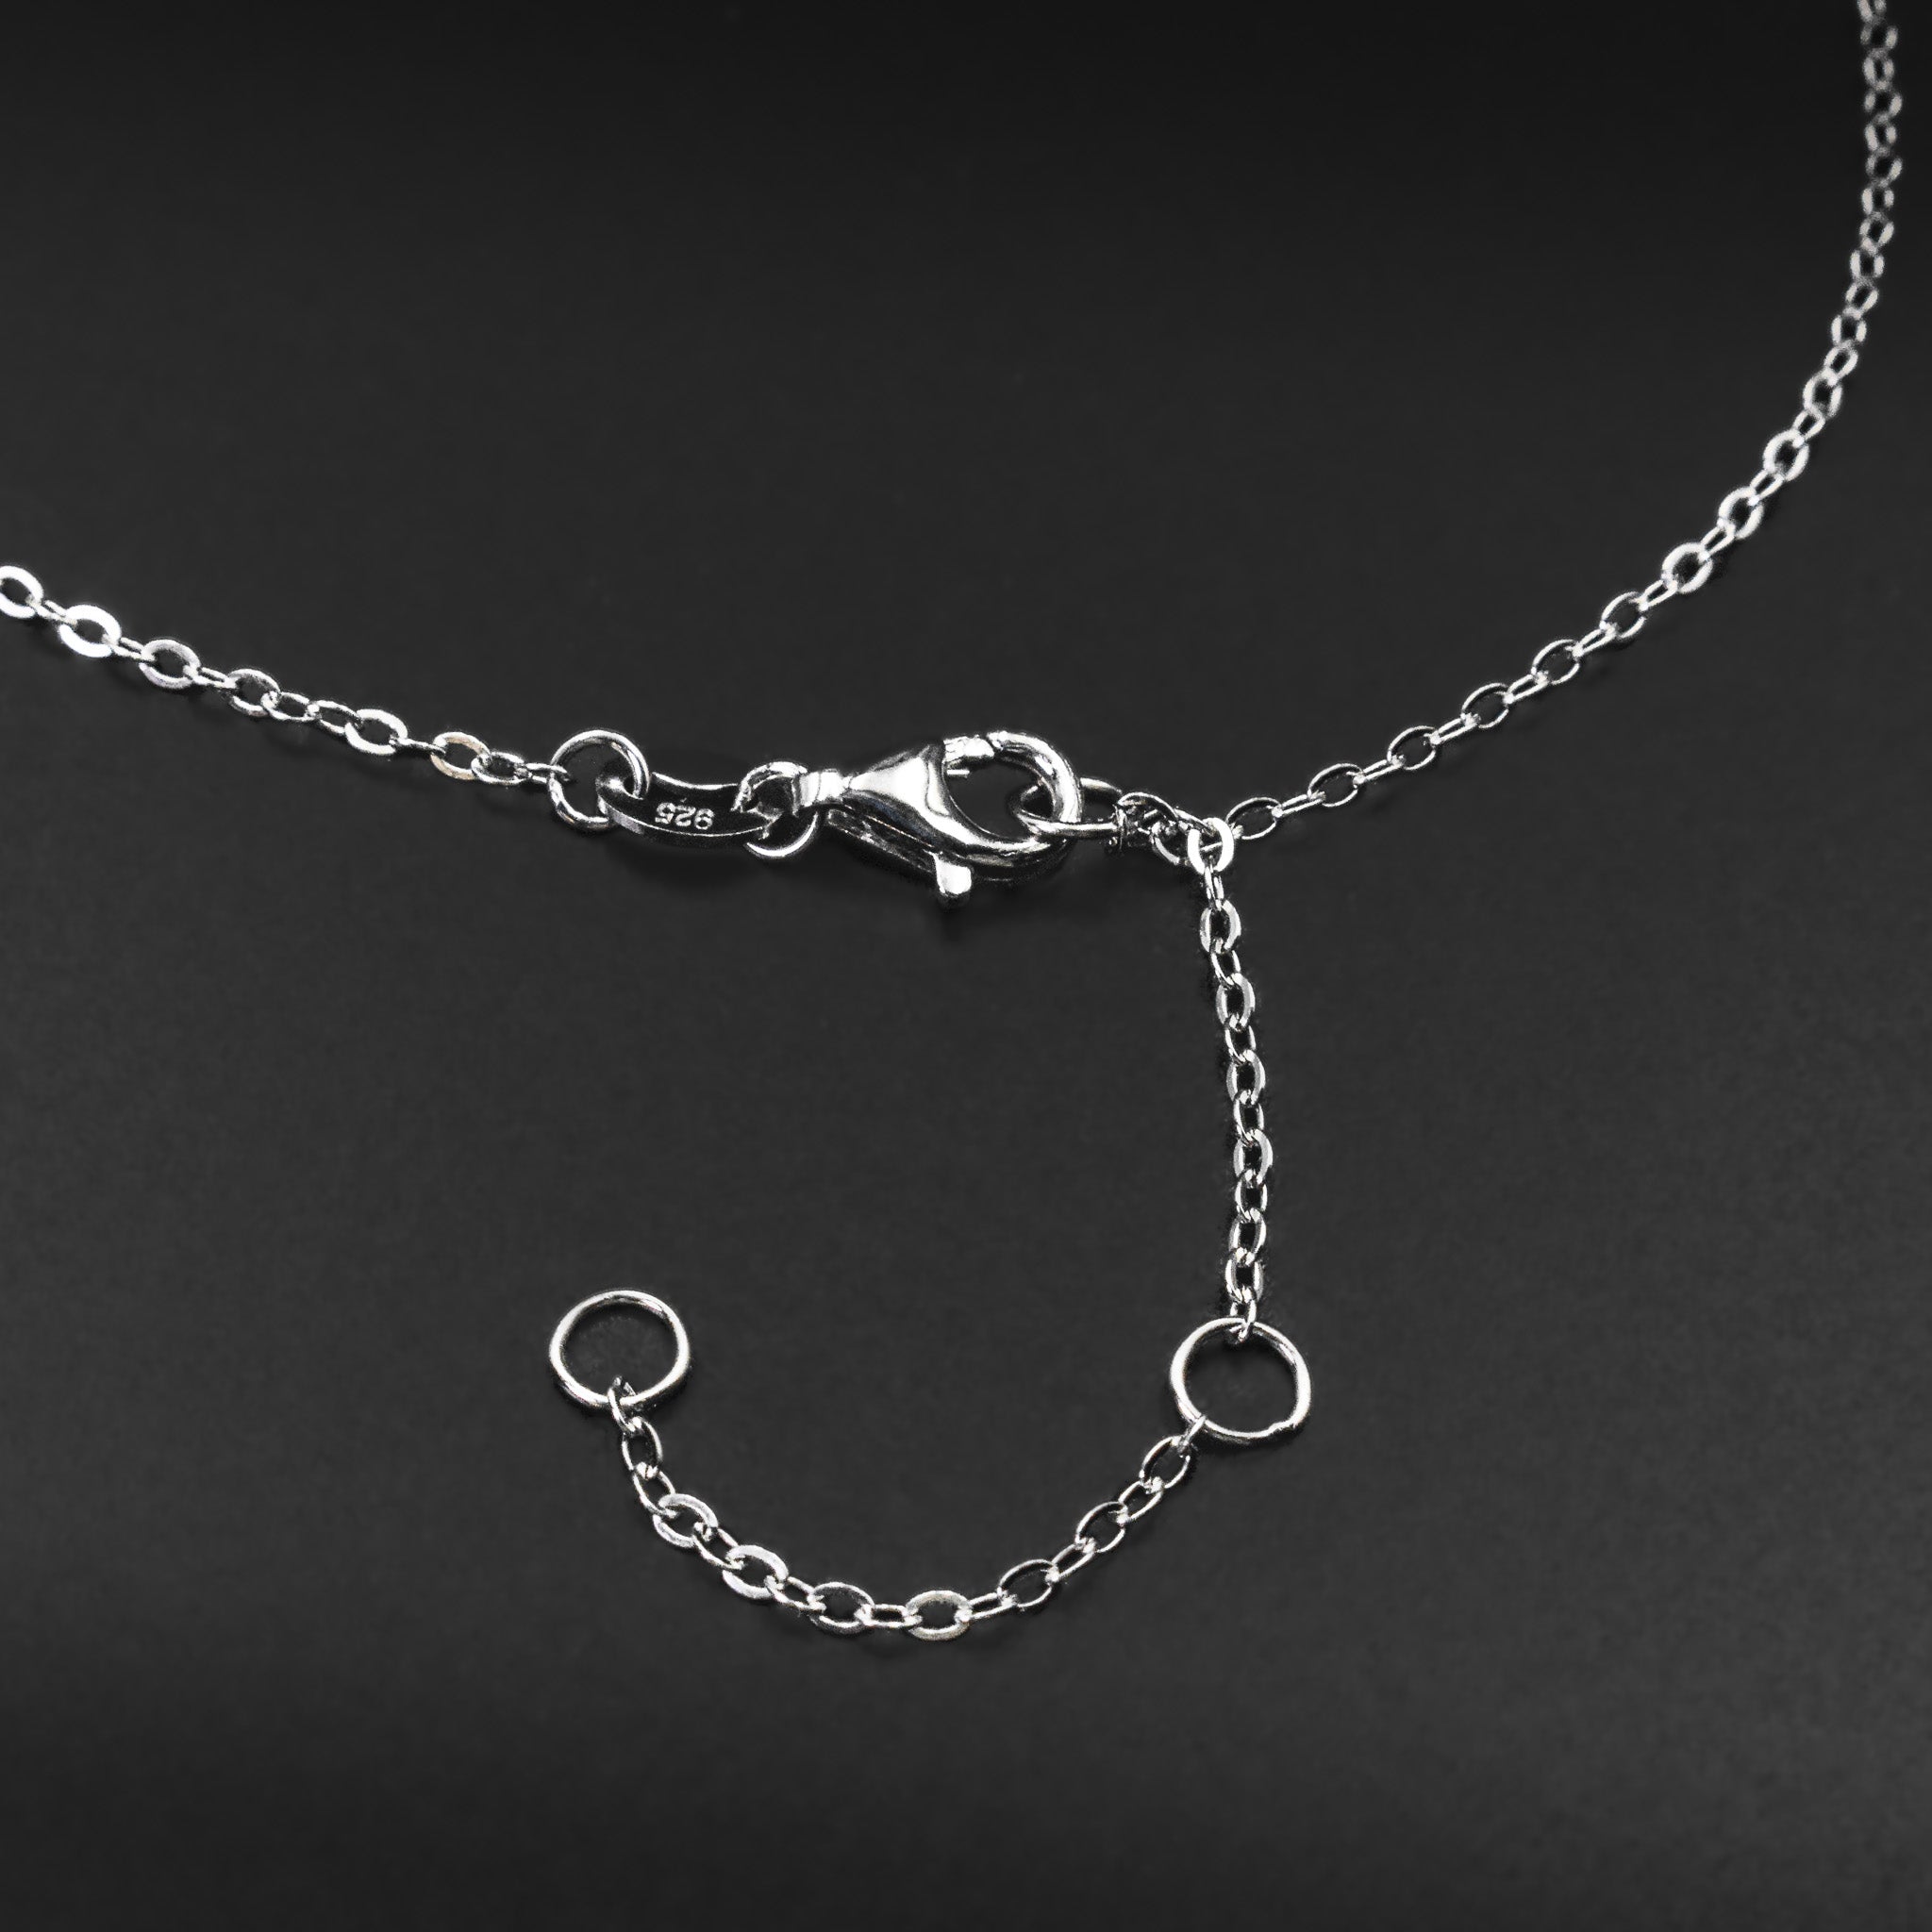 Kabuer Sterling Silver Necklace Sliver Chain Necklace E India | Ubuy